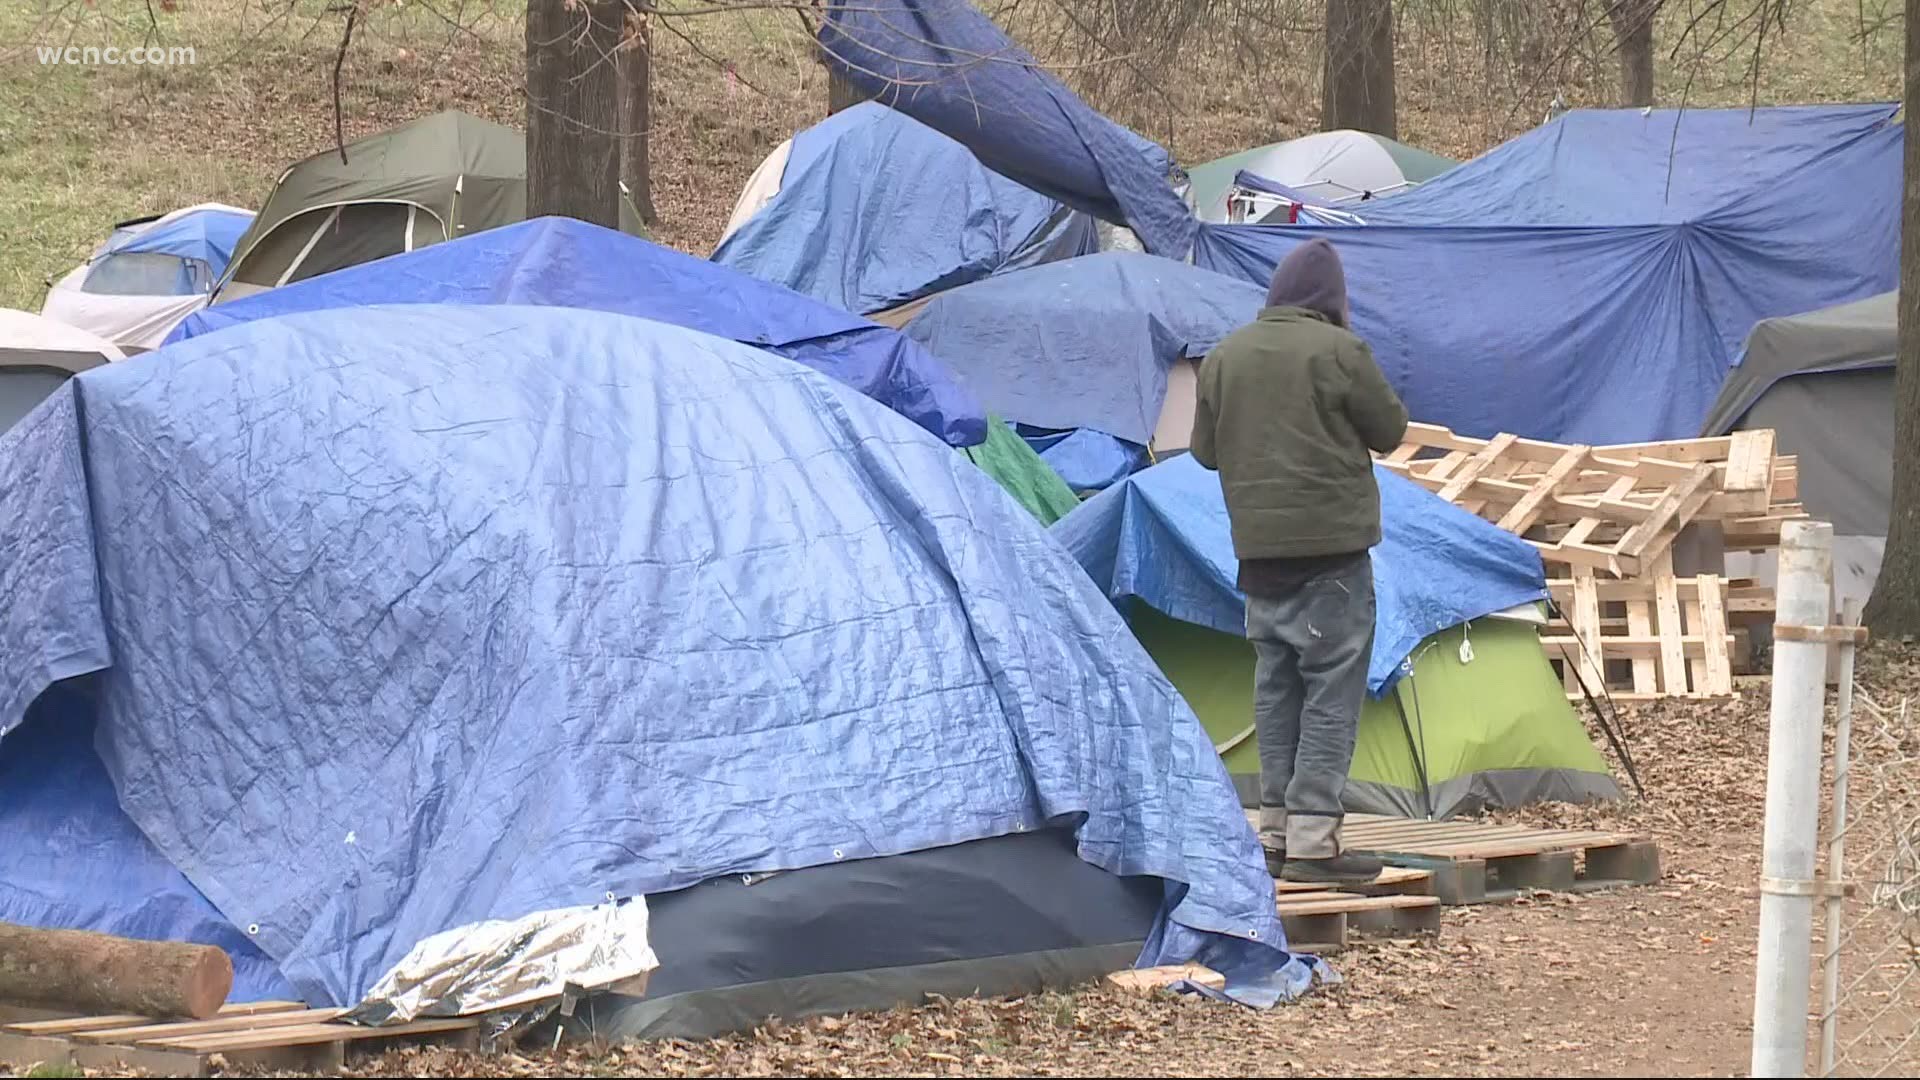 There is a growing homeless problem in the Queen City.